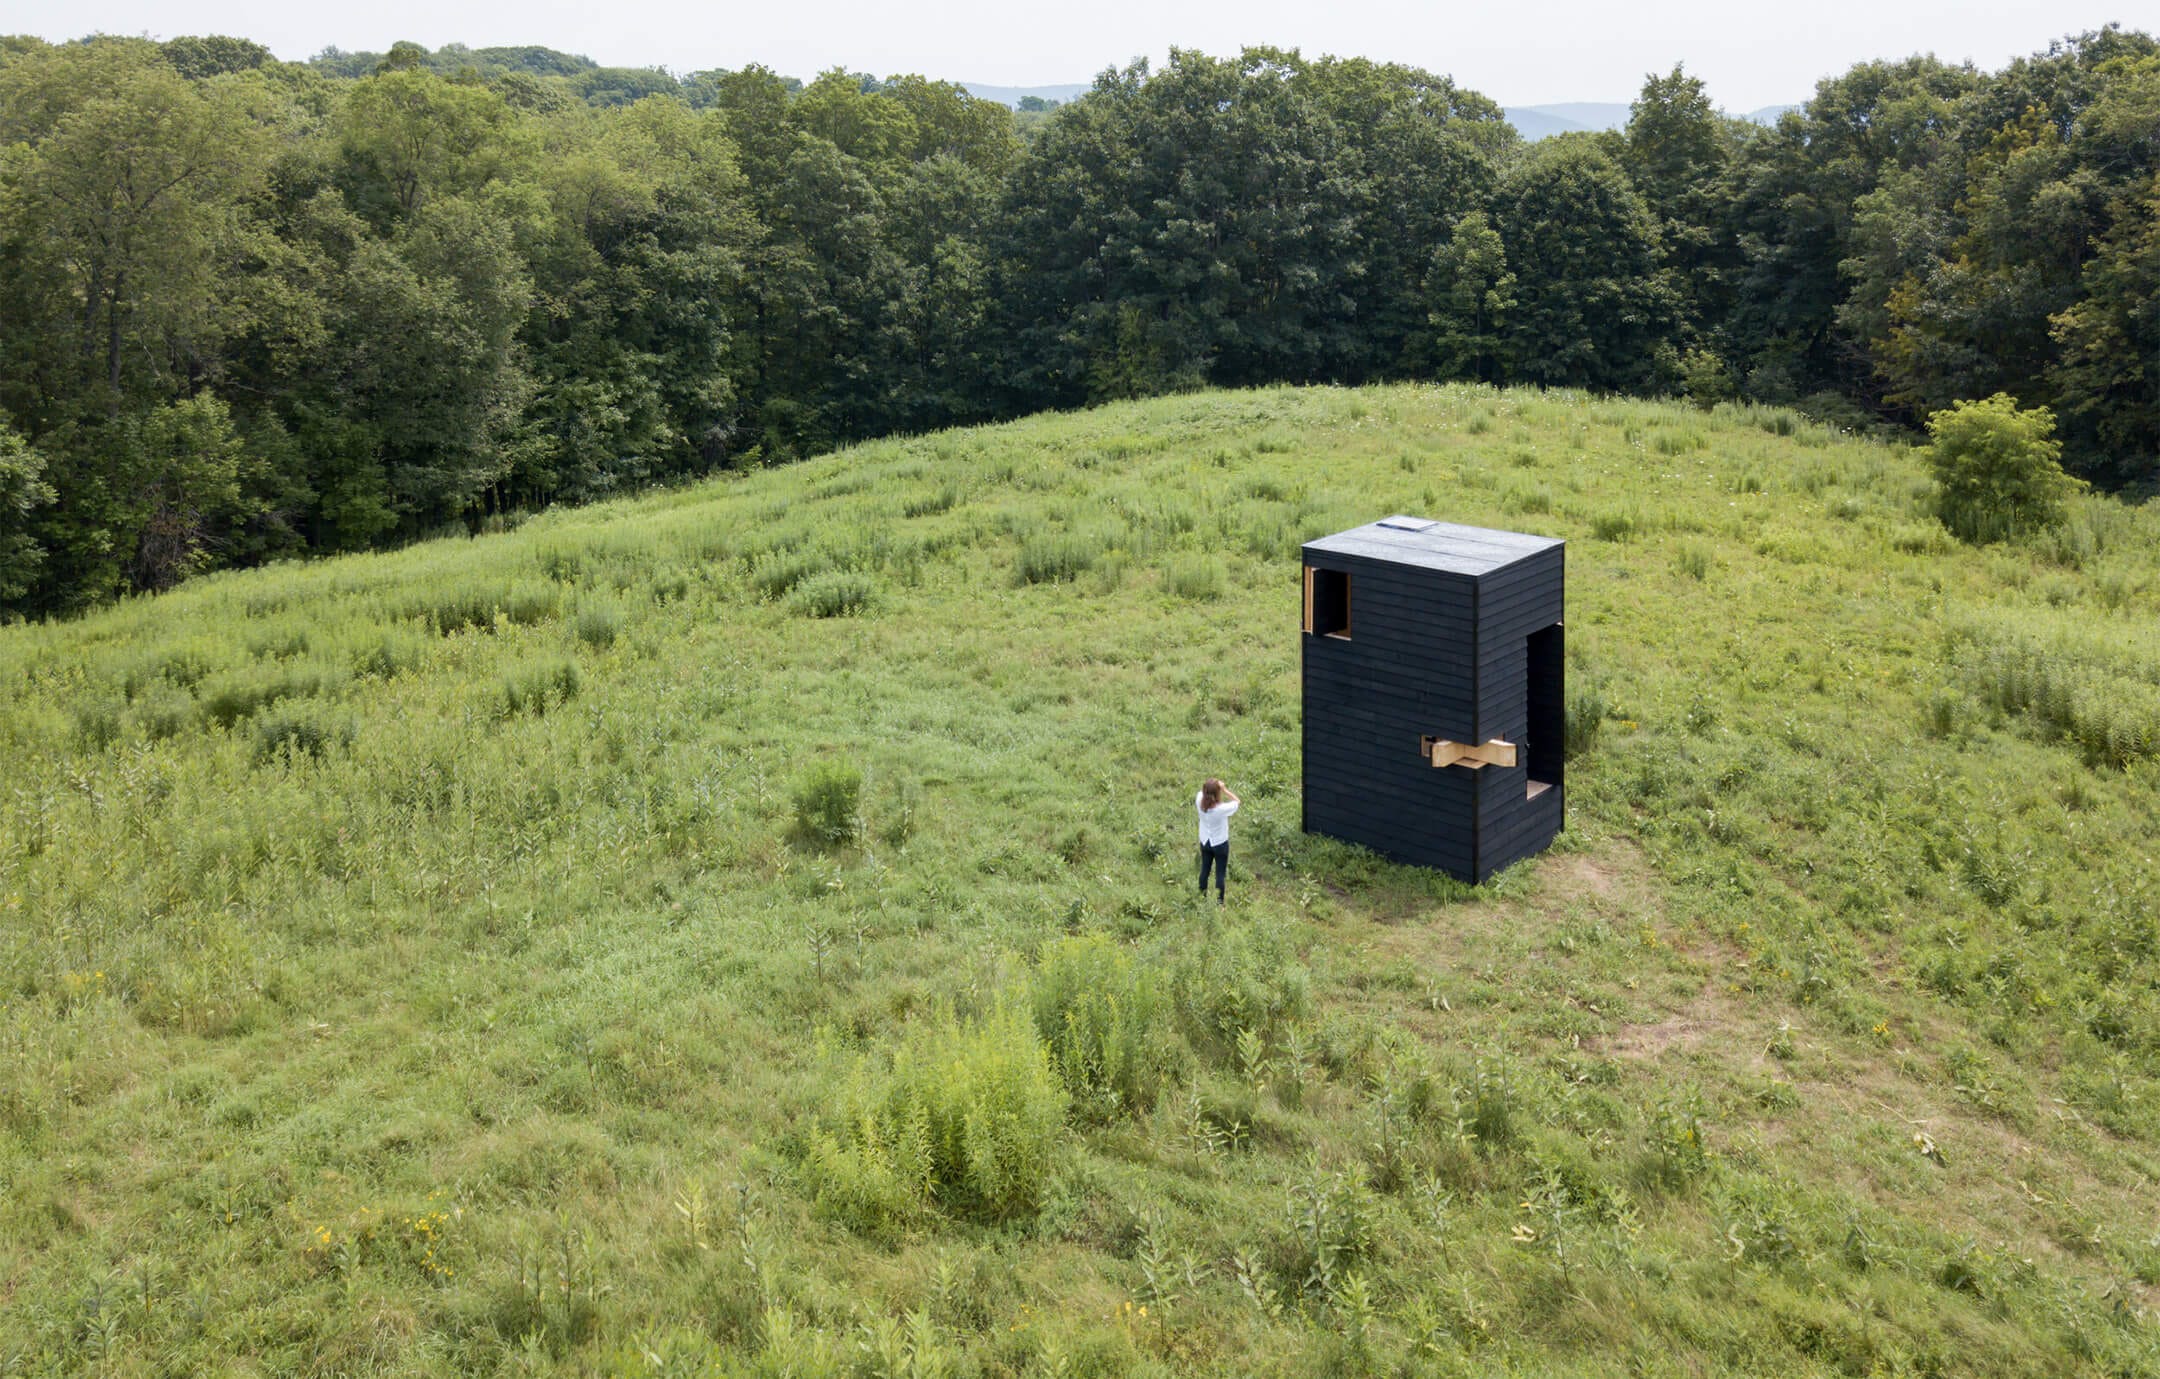 Drone-eye view of a cabin, in black-painted wood, in the middle of a grassy hill